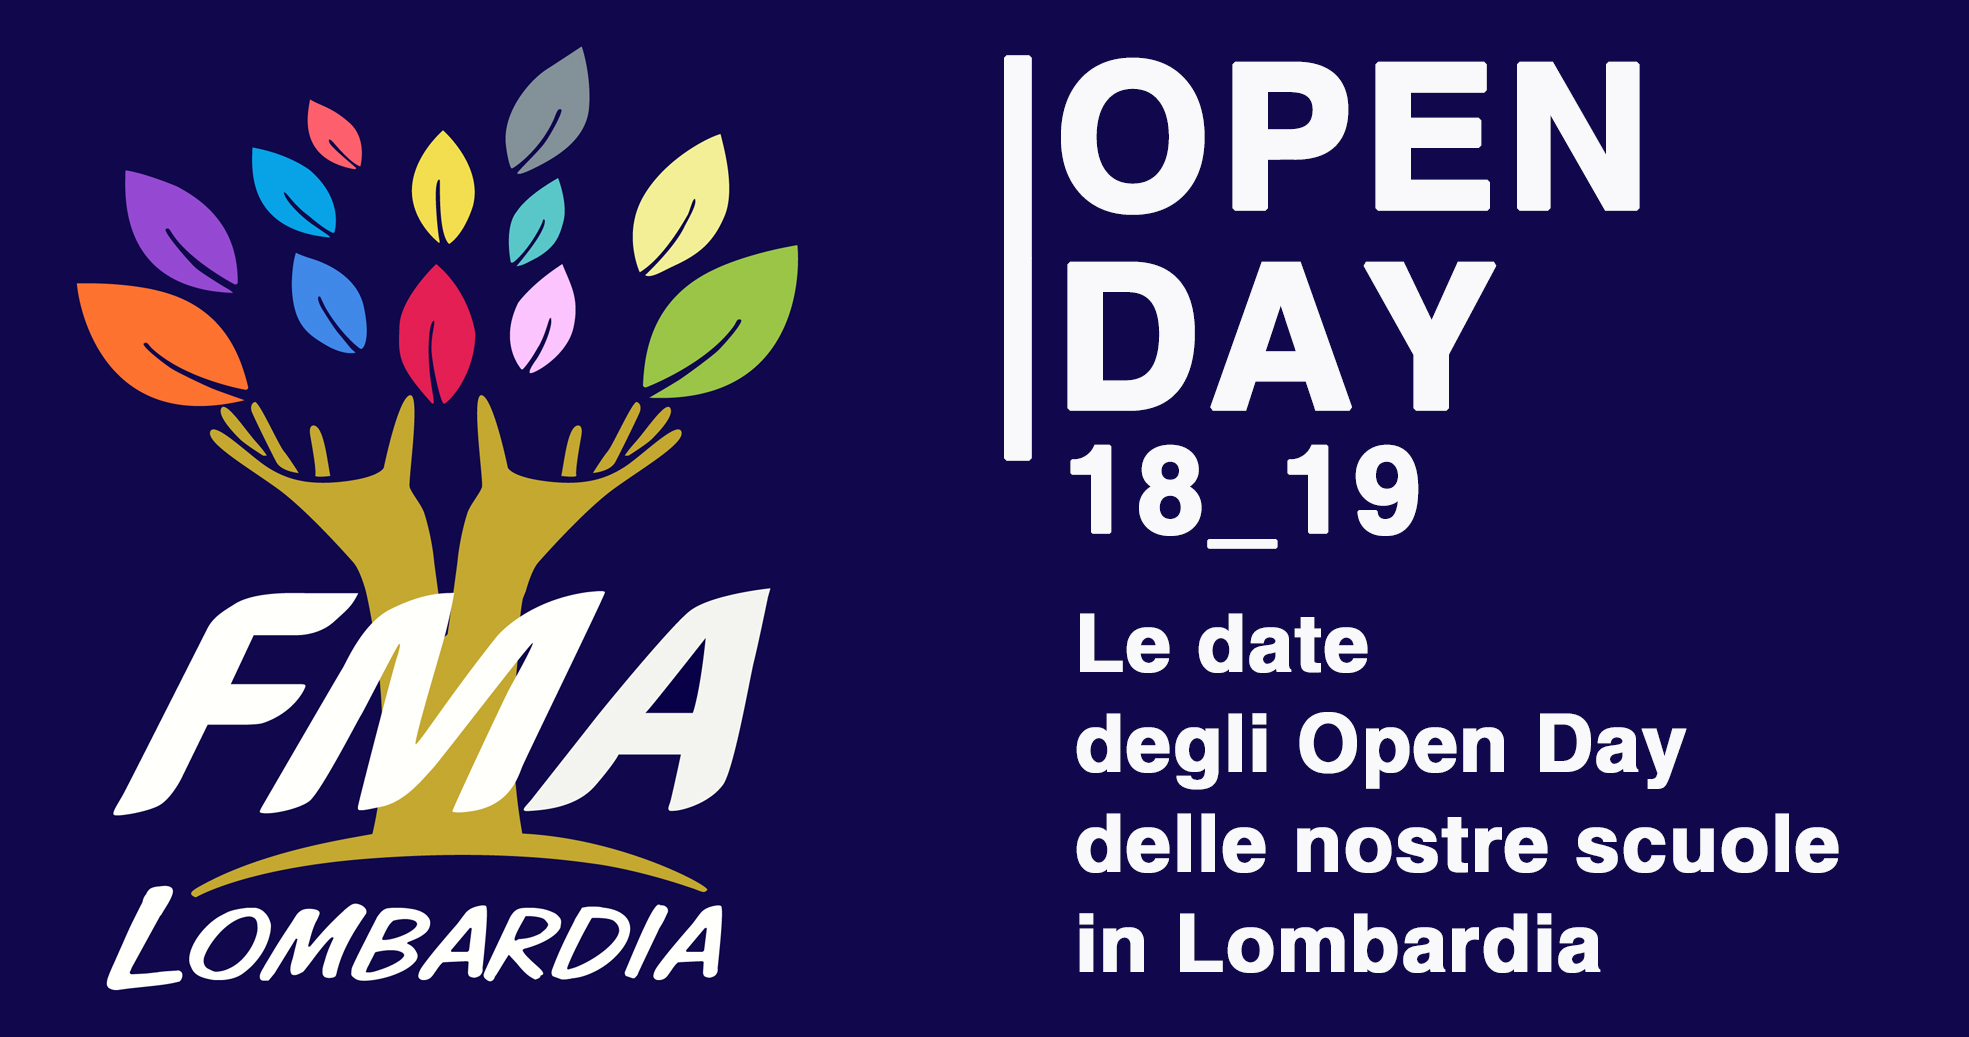 Open Day 2018/2019 in Lombardia